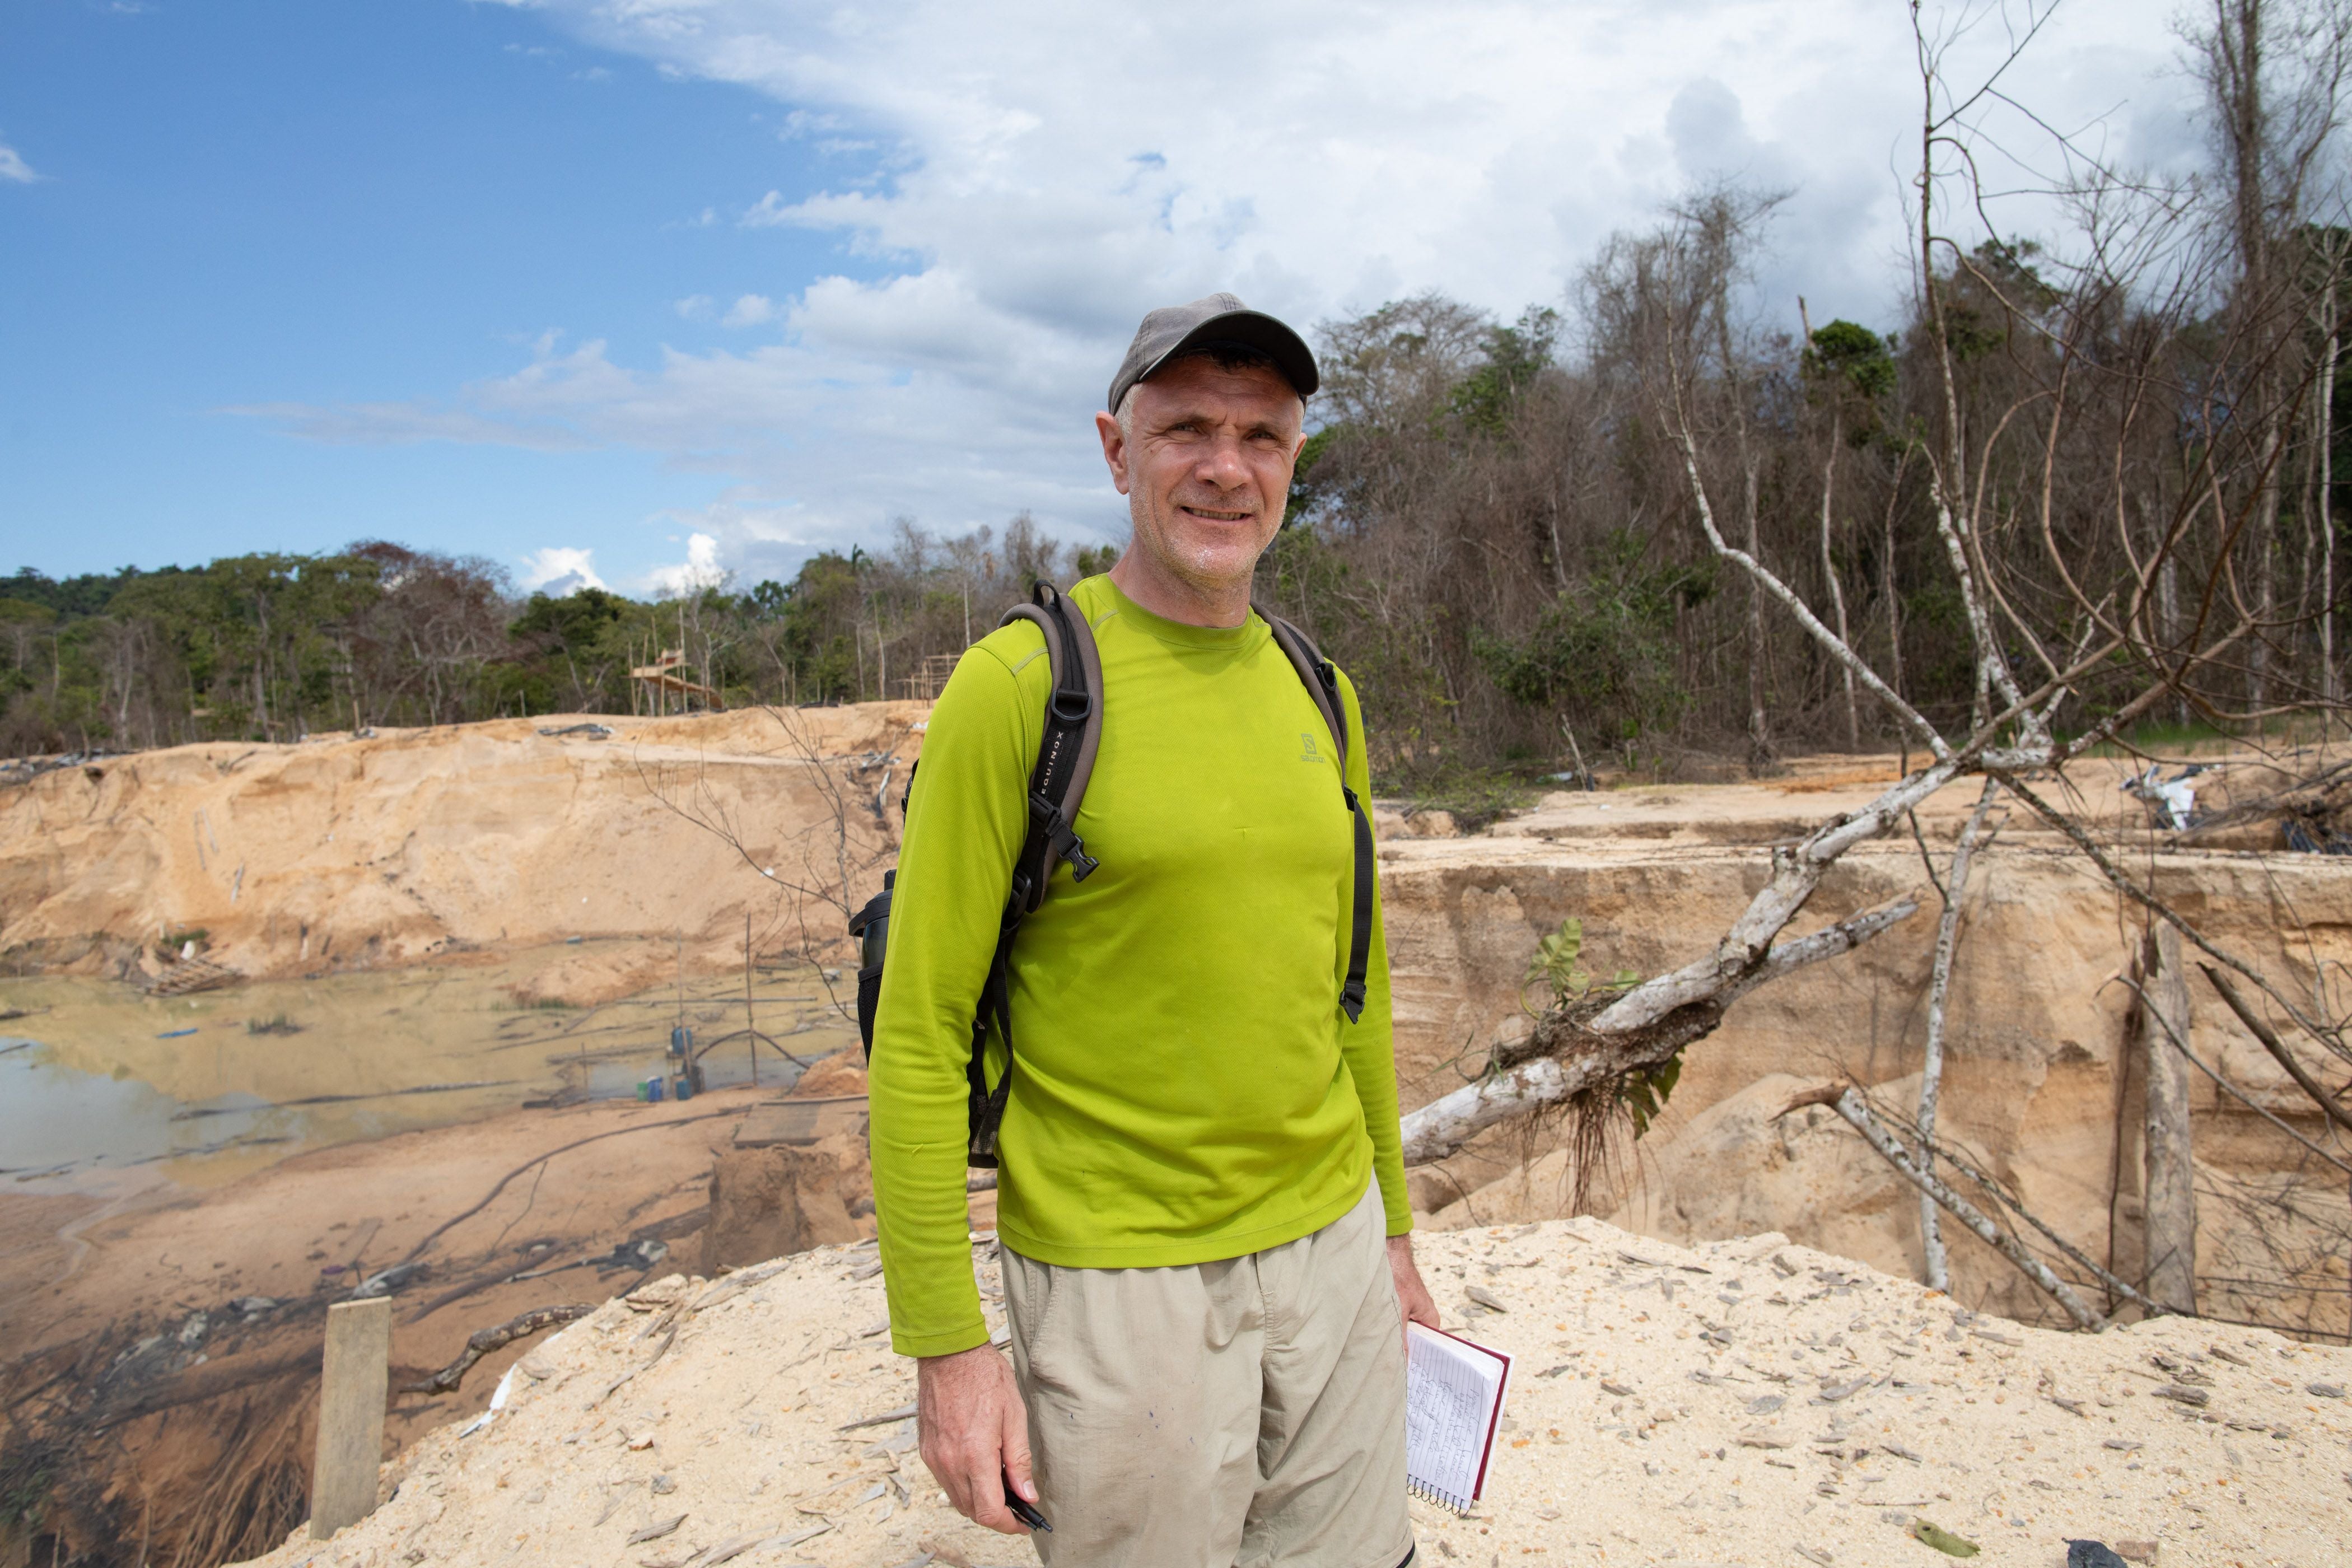 Dom Phillips is a long-time journalist who has covered environmental affairs in Brazil for over a decade